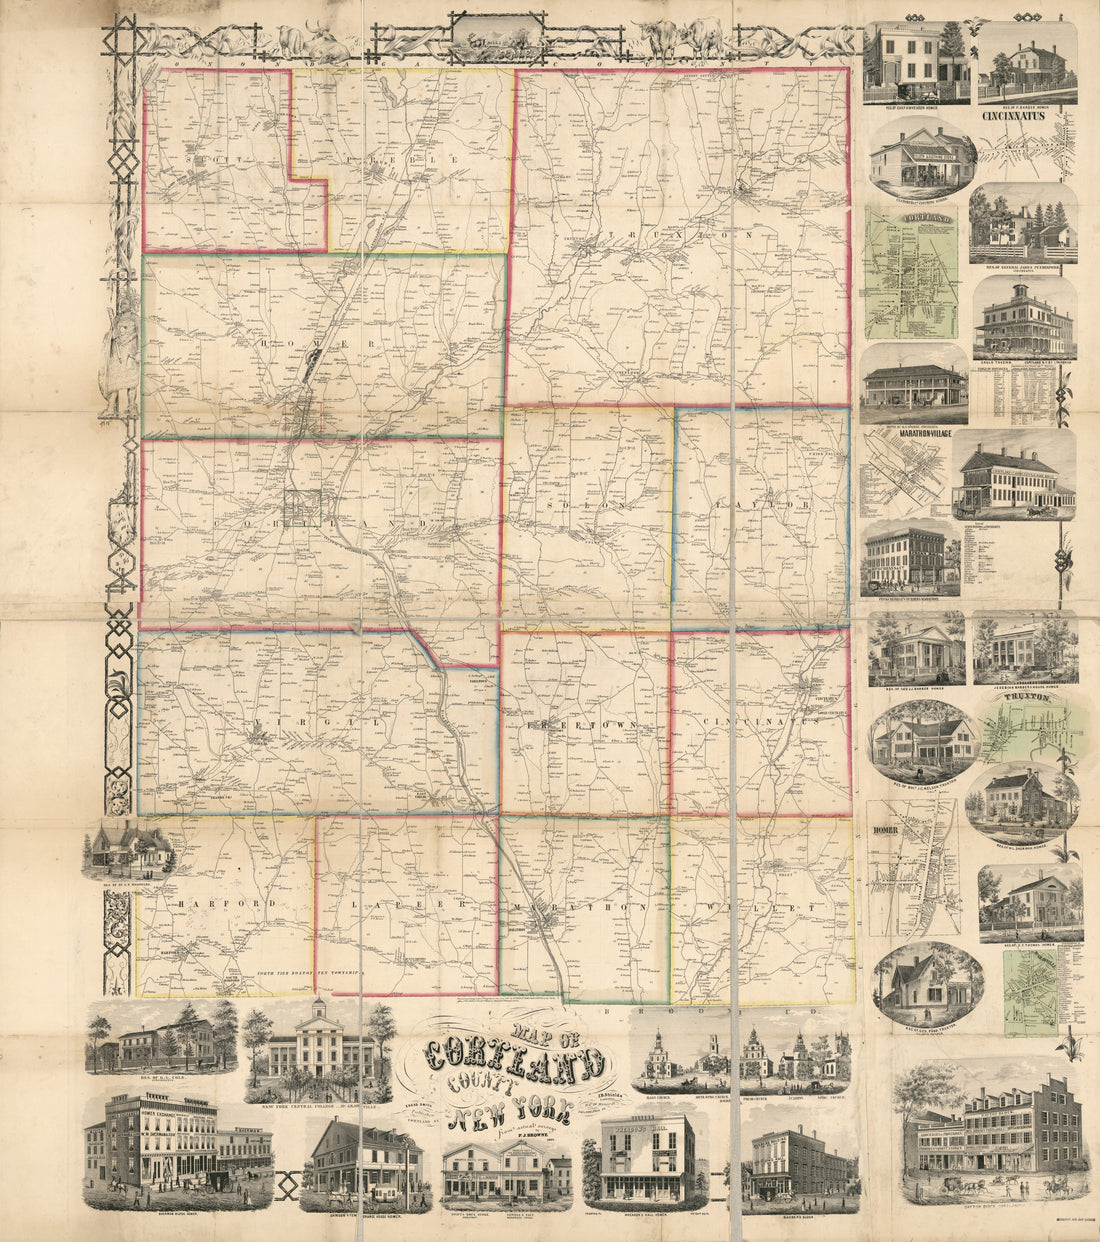 This old map of Map of Cortland County, New York : from Actual Surveys from 1855 was created by P. J. Browne, J. B. Shields, Eneas Smith, Robert Pearsall Smith in 1855